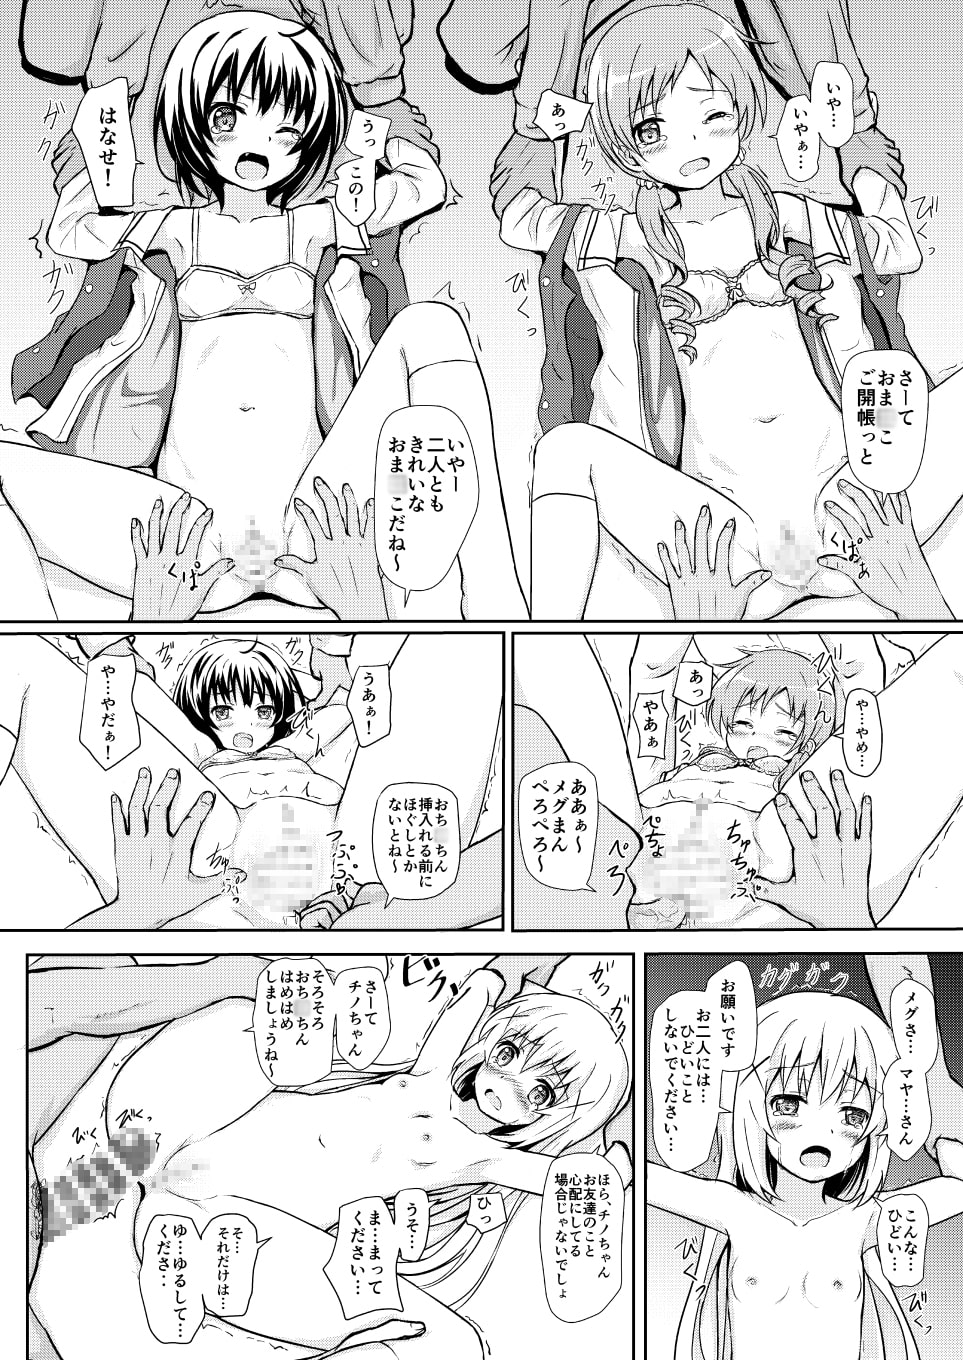 Abducted Chimame